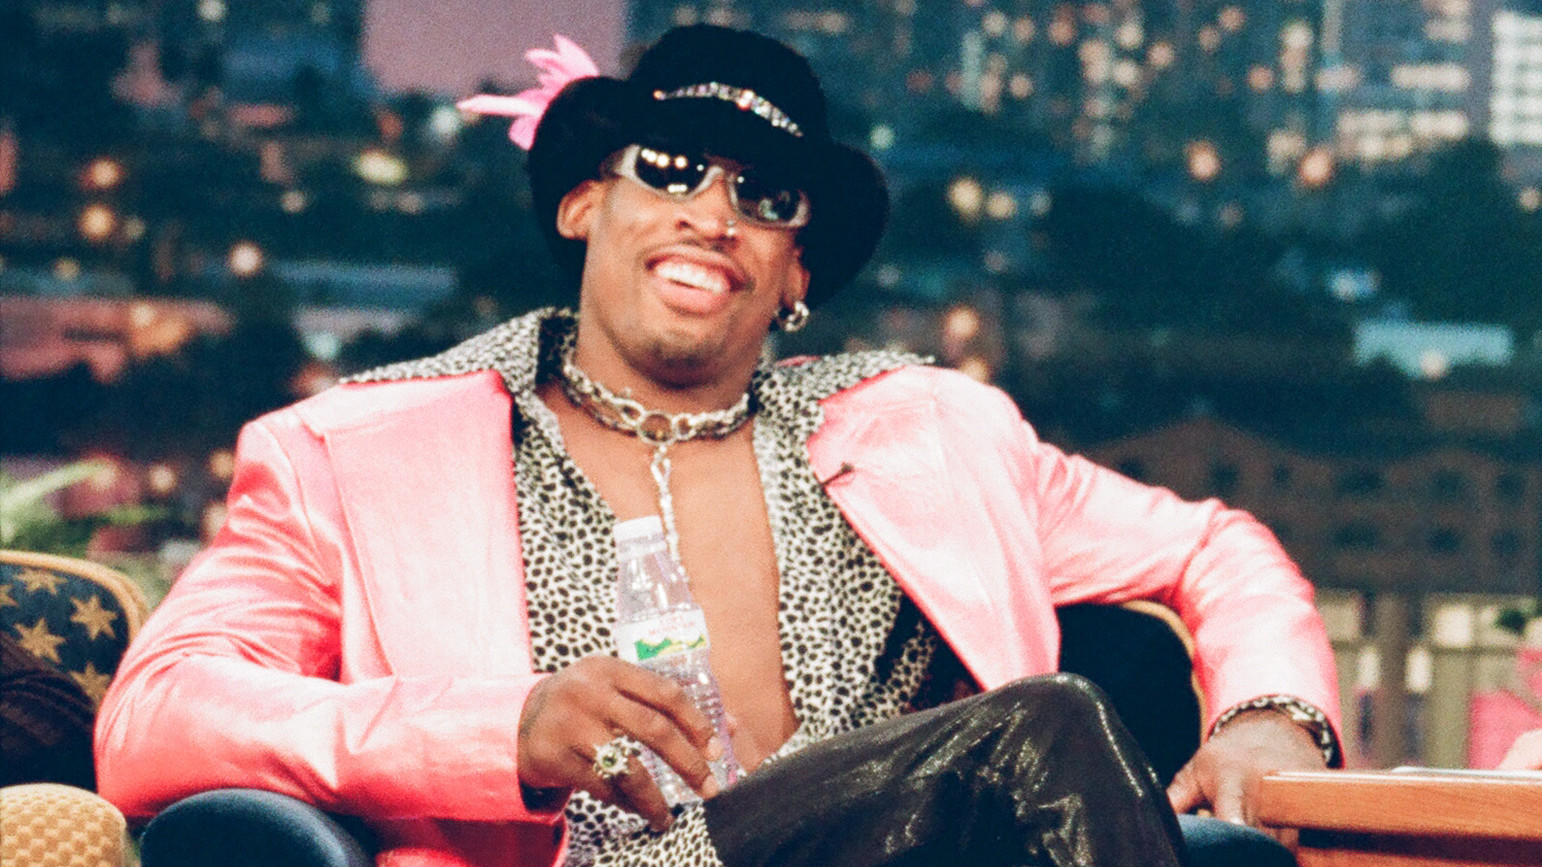 Dennis Rodman's Extremely Weird Fashion Moments in the '90s